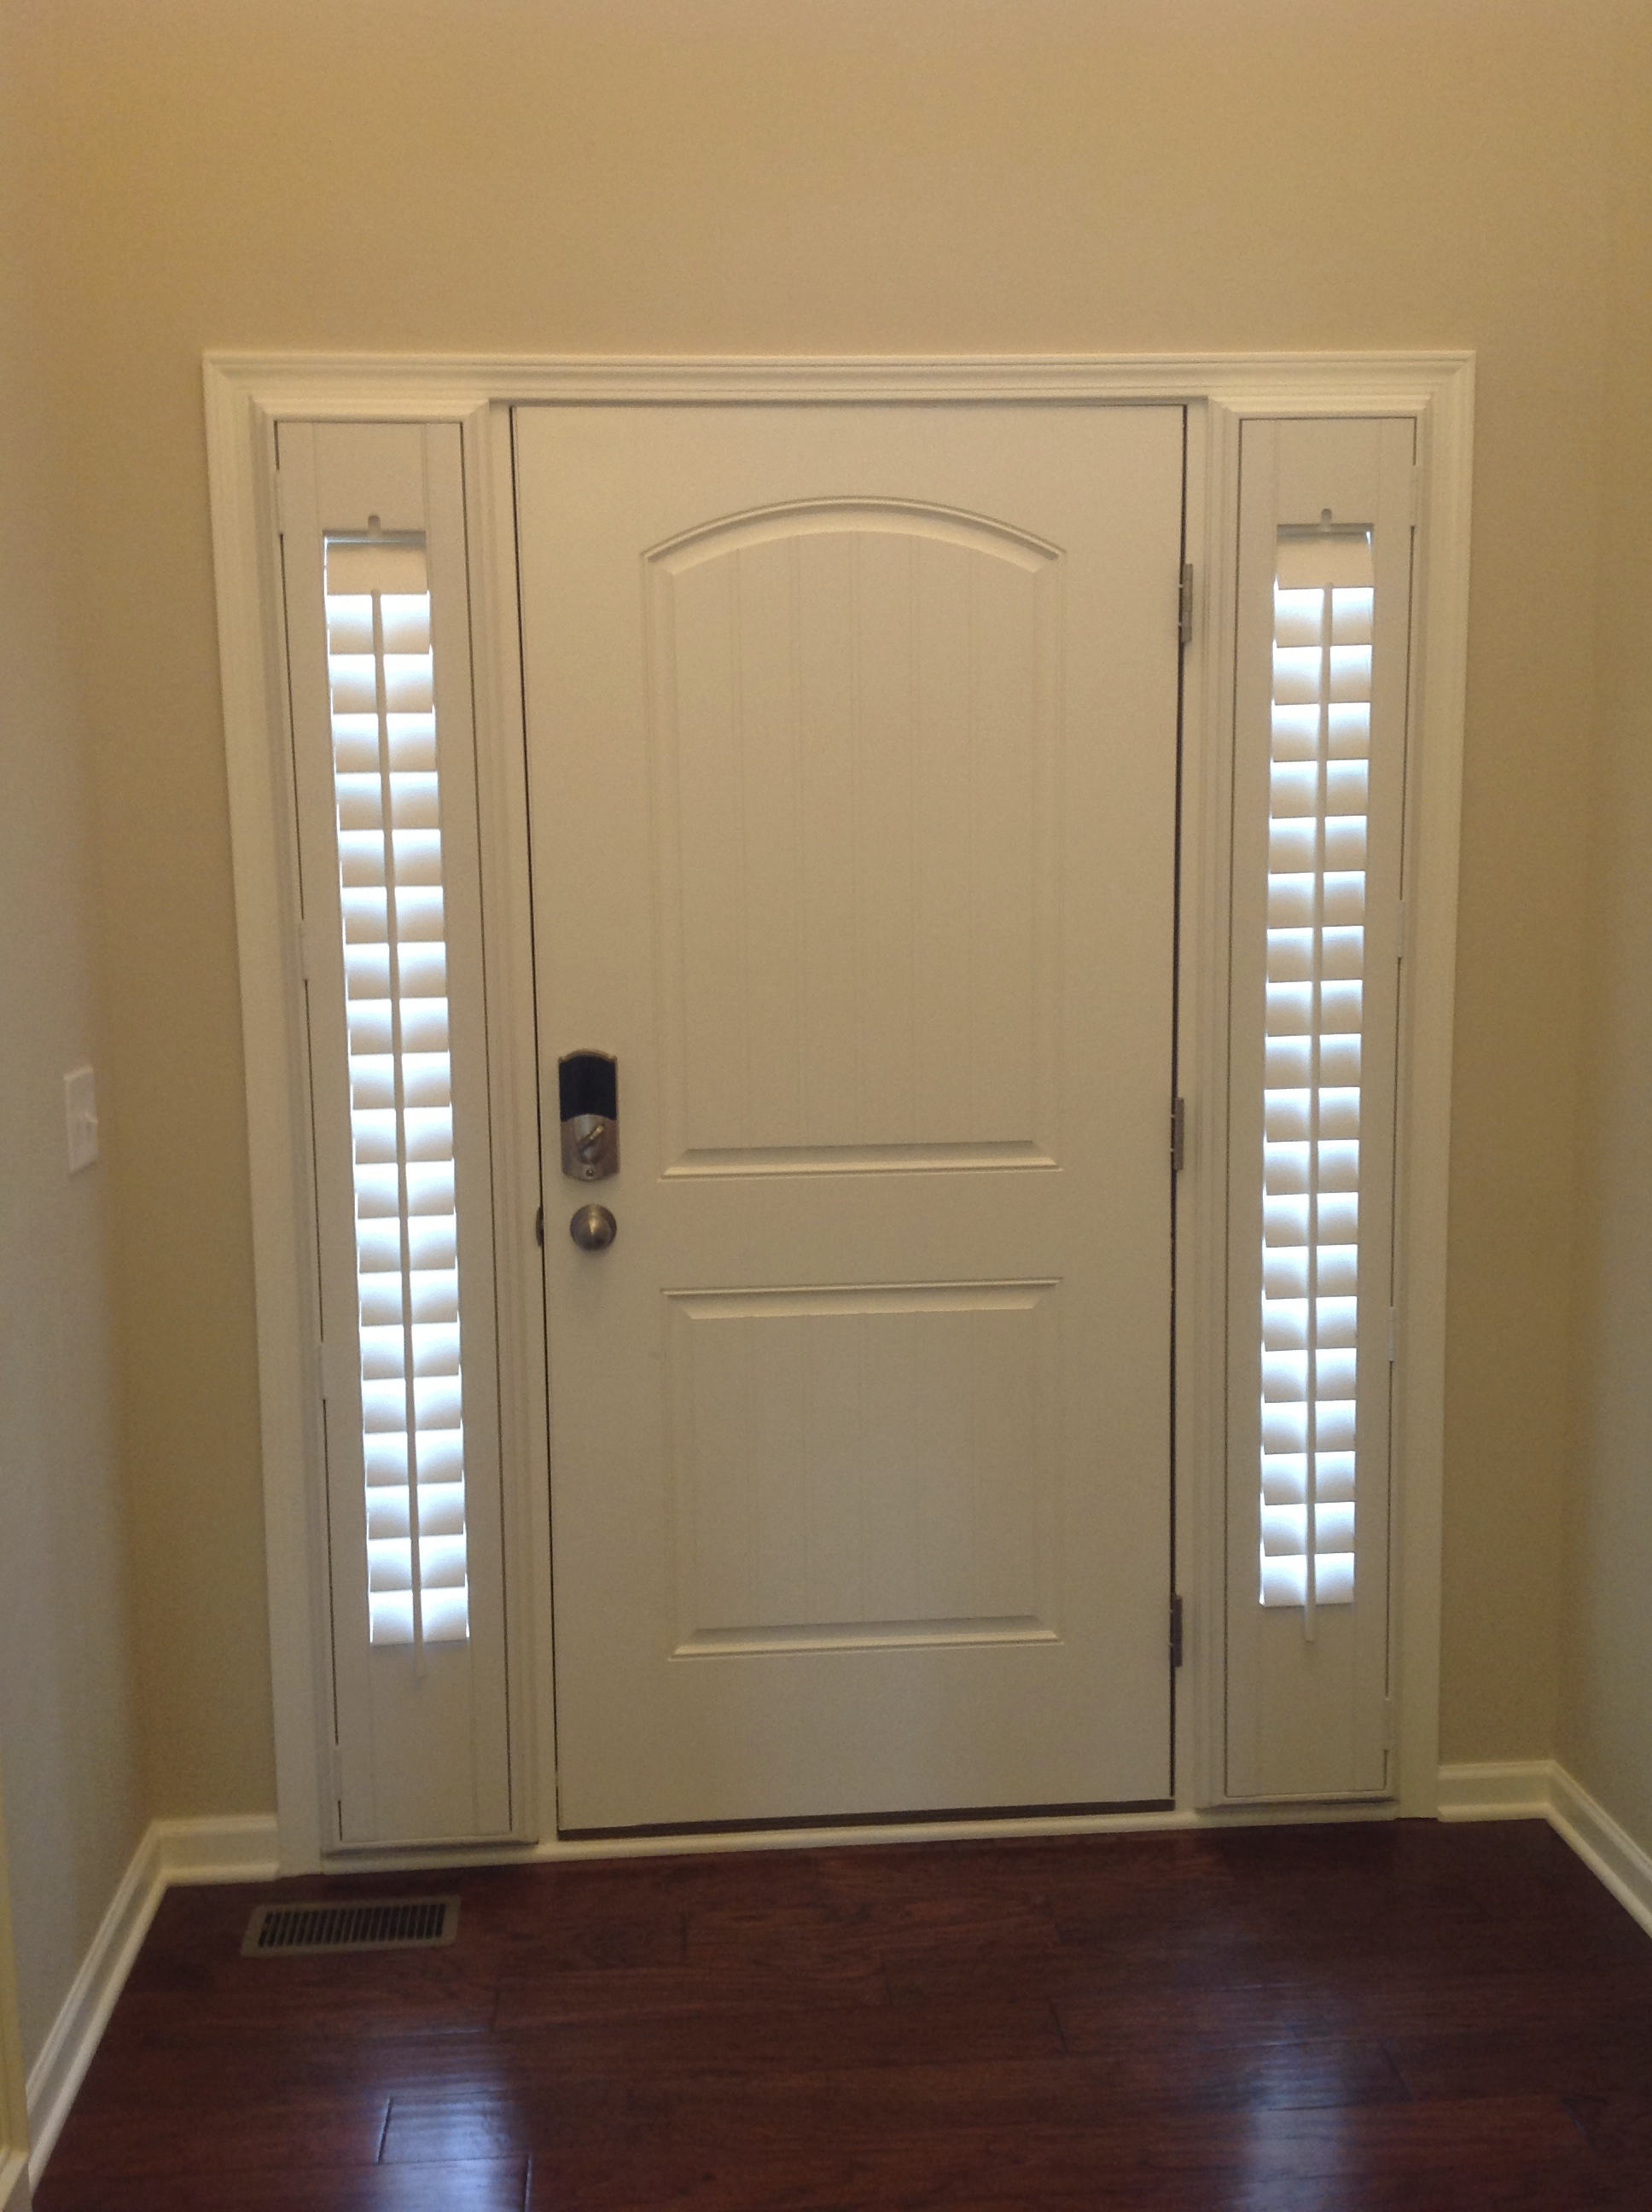 26 Good And Useful Ideas For Front Door Blinds - Interior Design